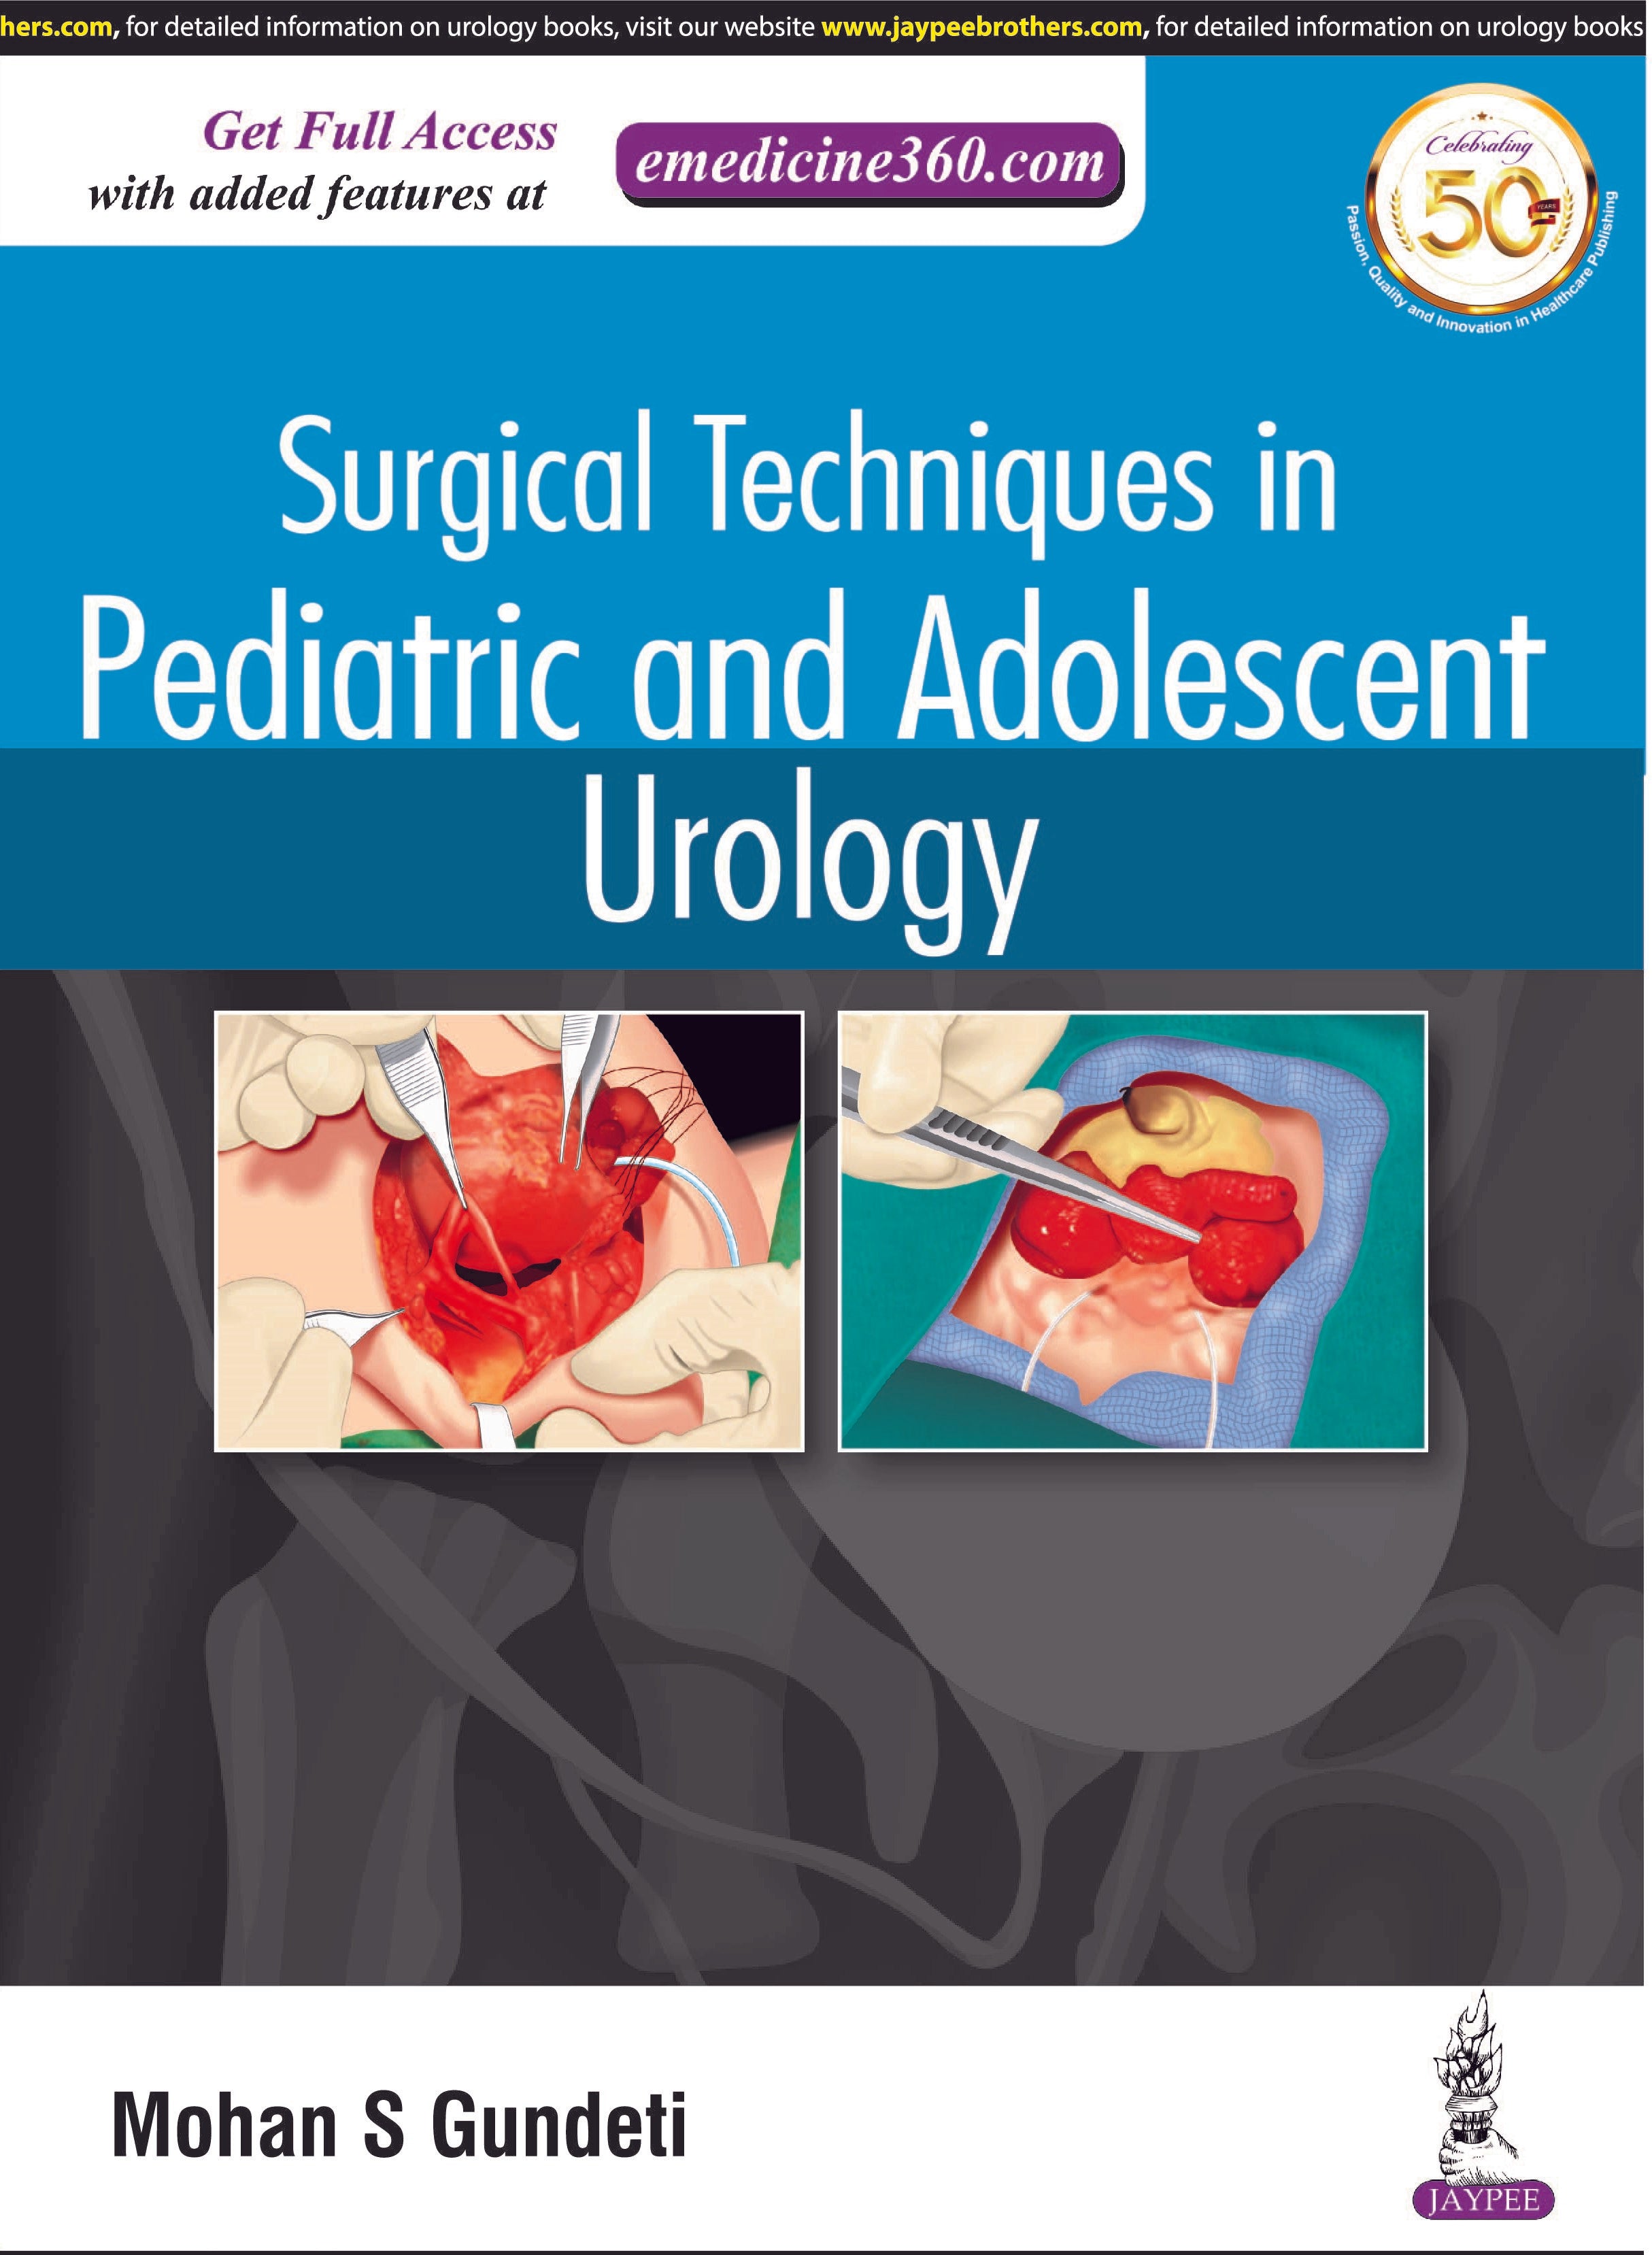 SURGICAL TECHNIQUES IN PEDIATRIC AND ADOLESCENT UROLOGY,1/E,MOHAN S GUNDETI